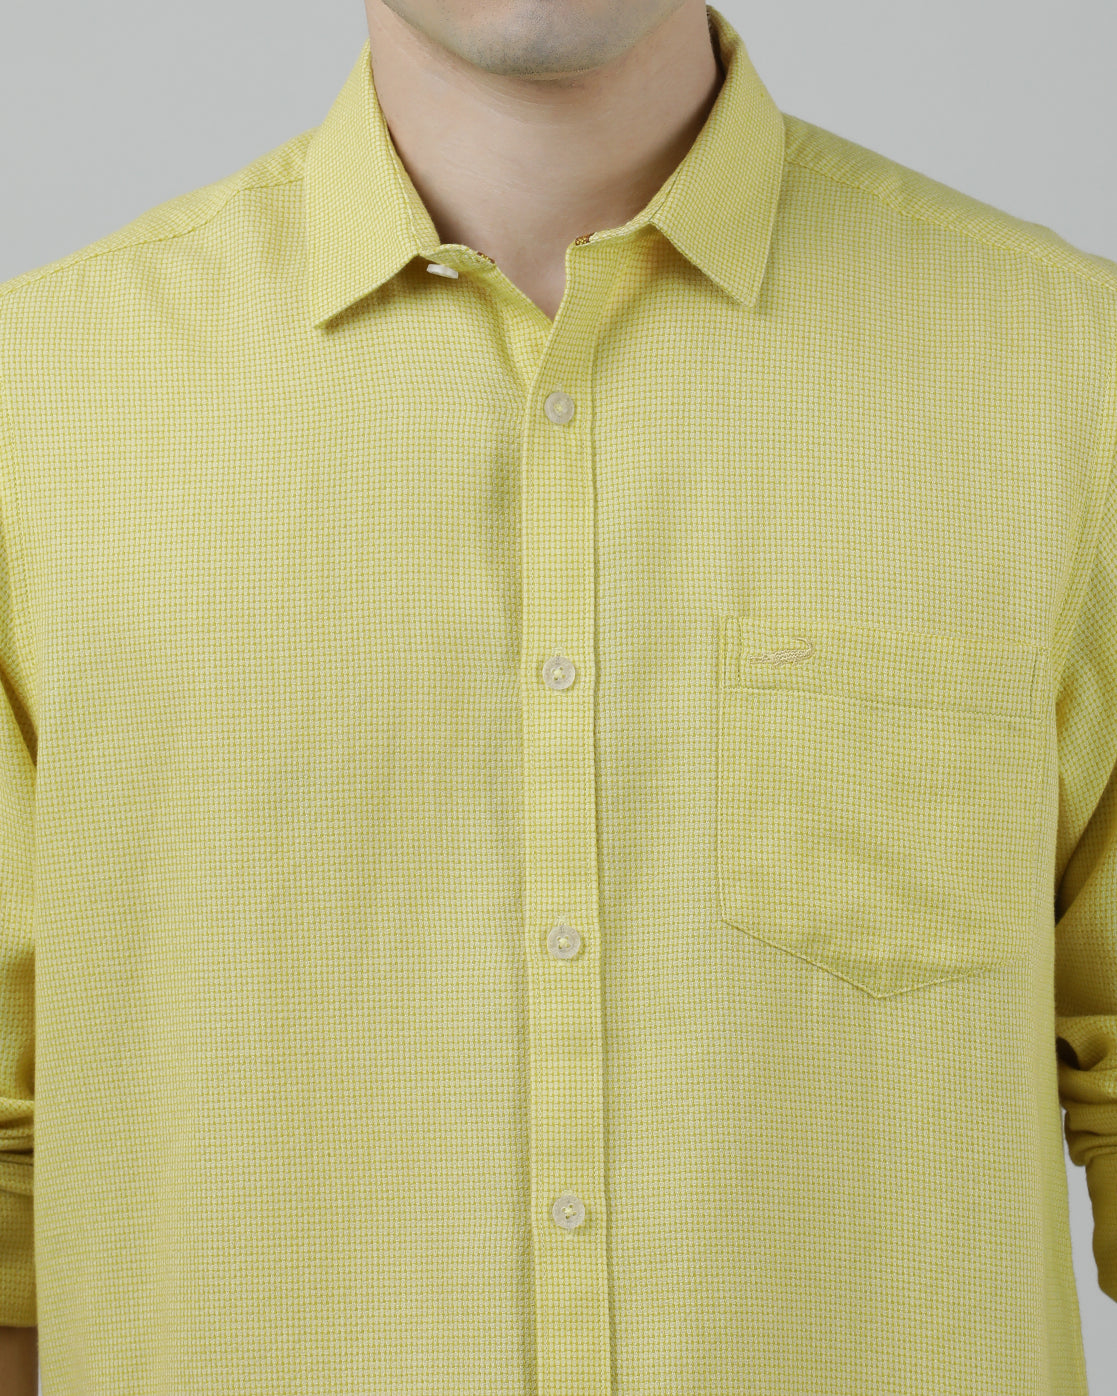 Casual Full Sleeve Slim Fit Solid Shirt Yellow for Men